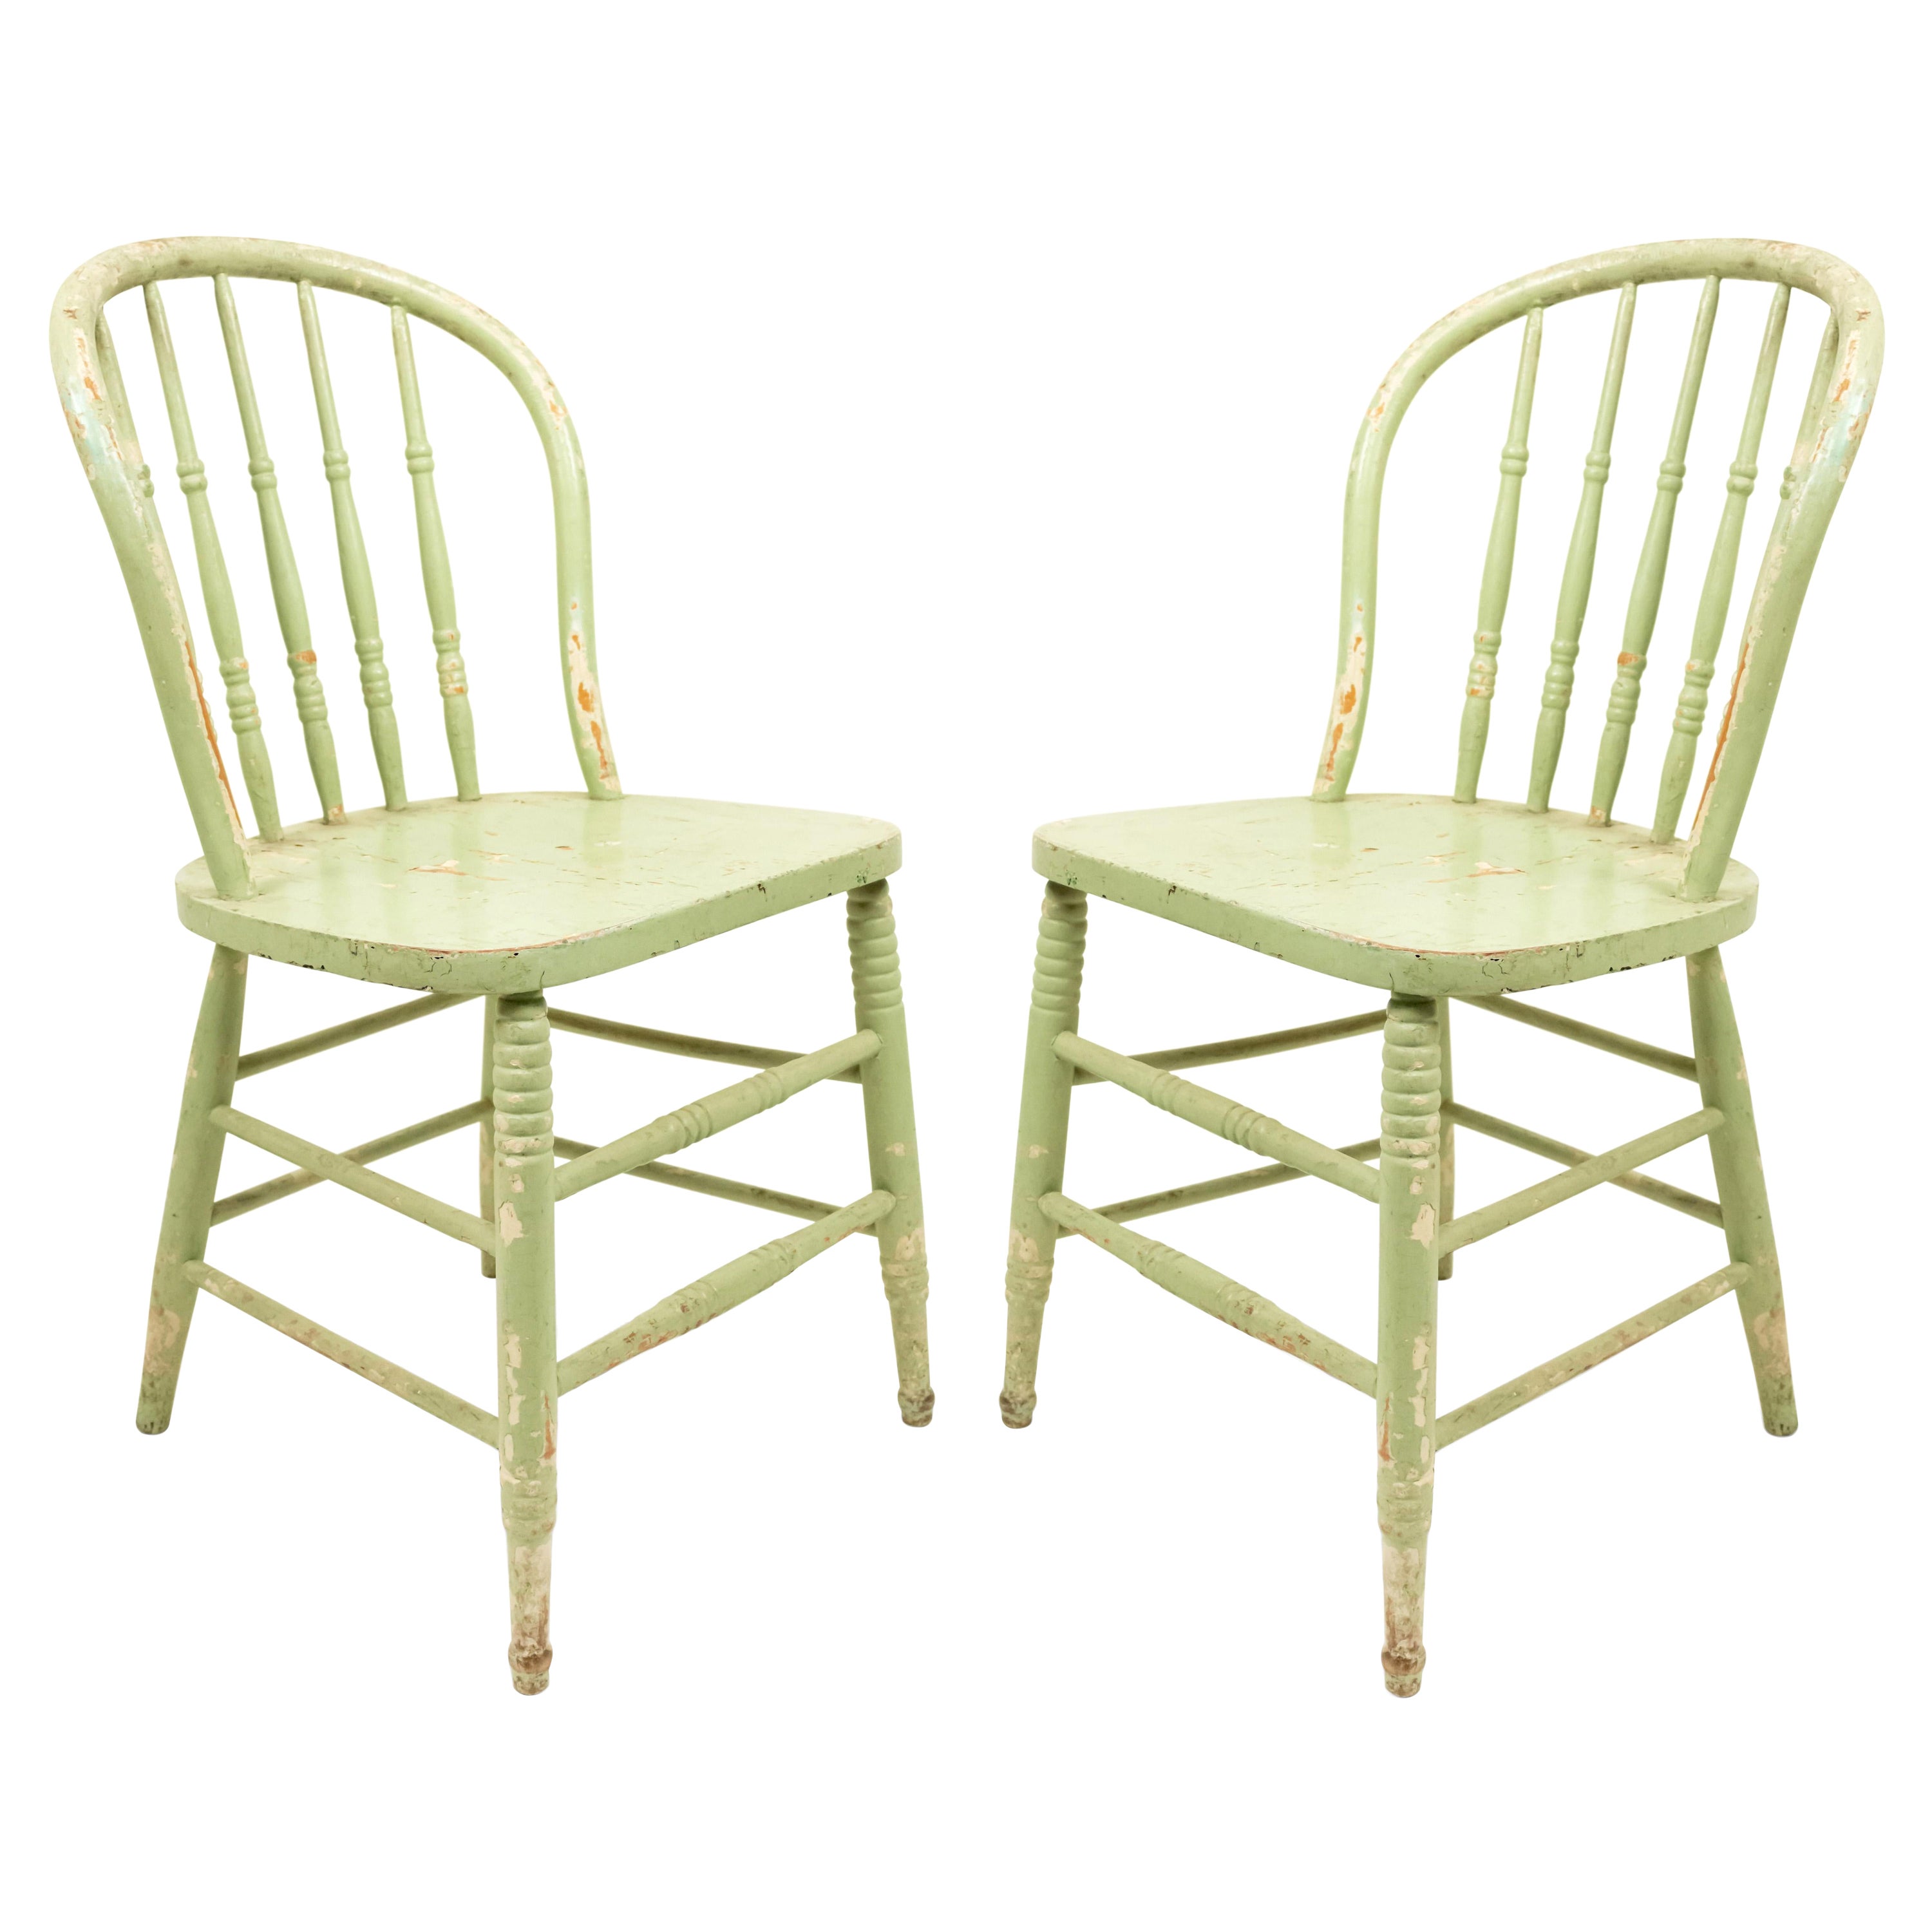 5 American Country Green Spindle Side Chairs